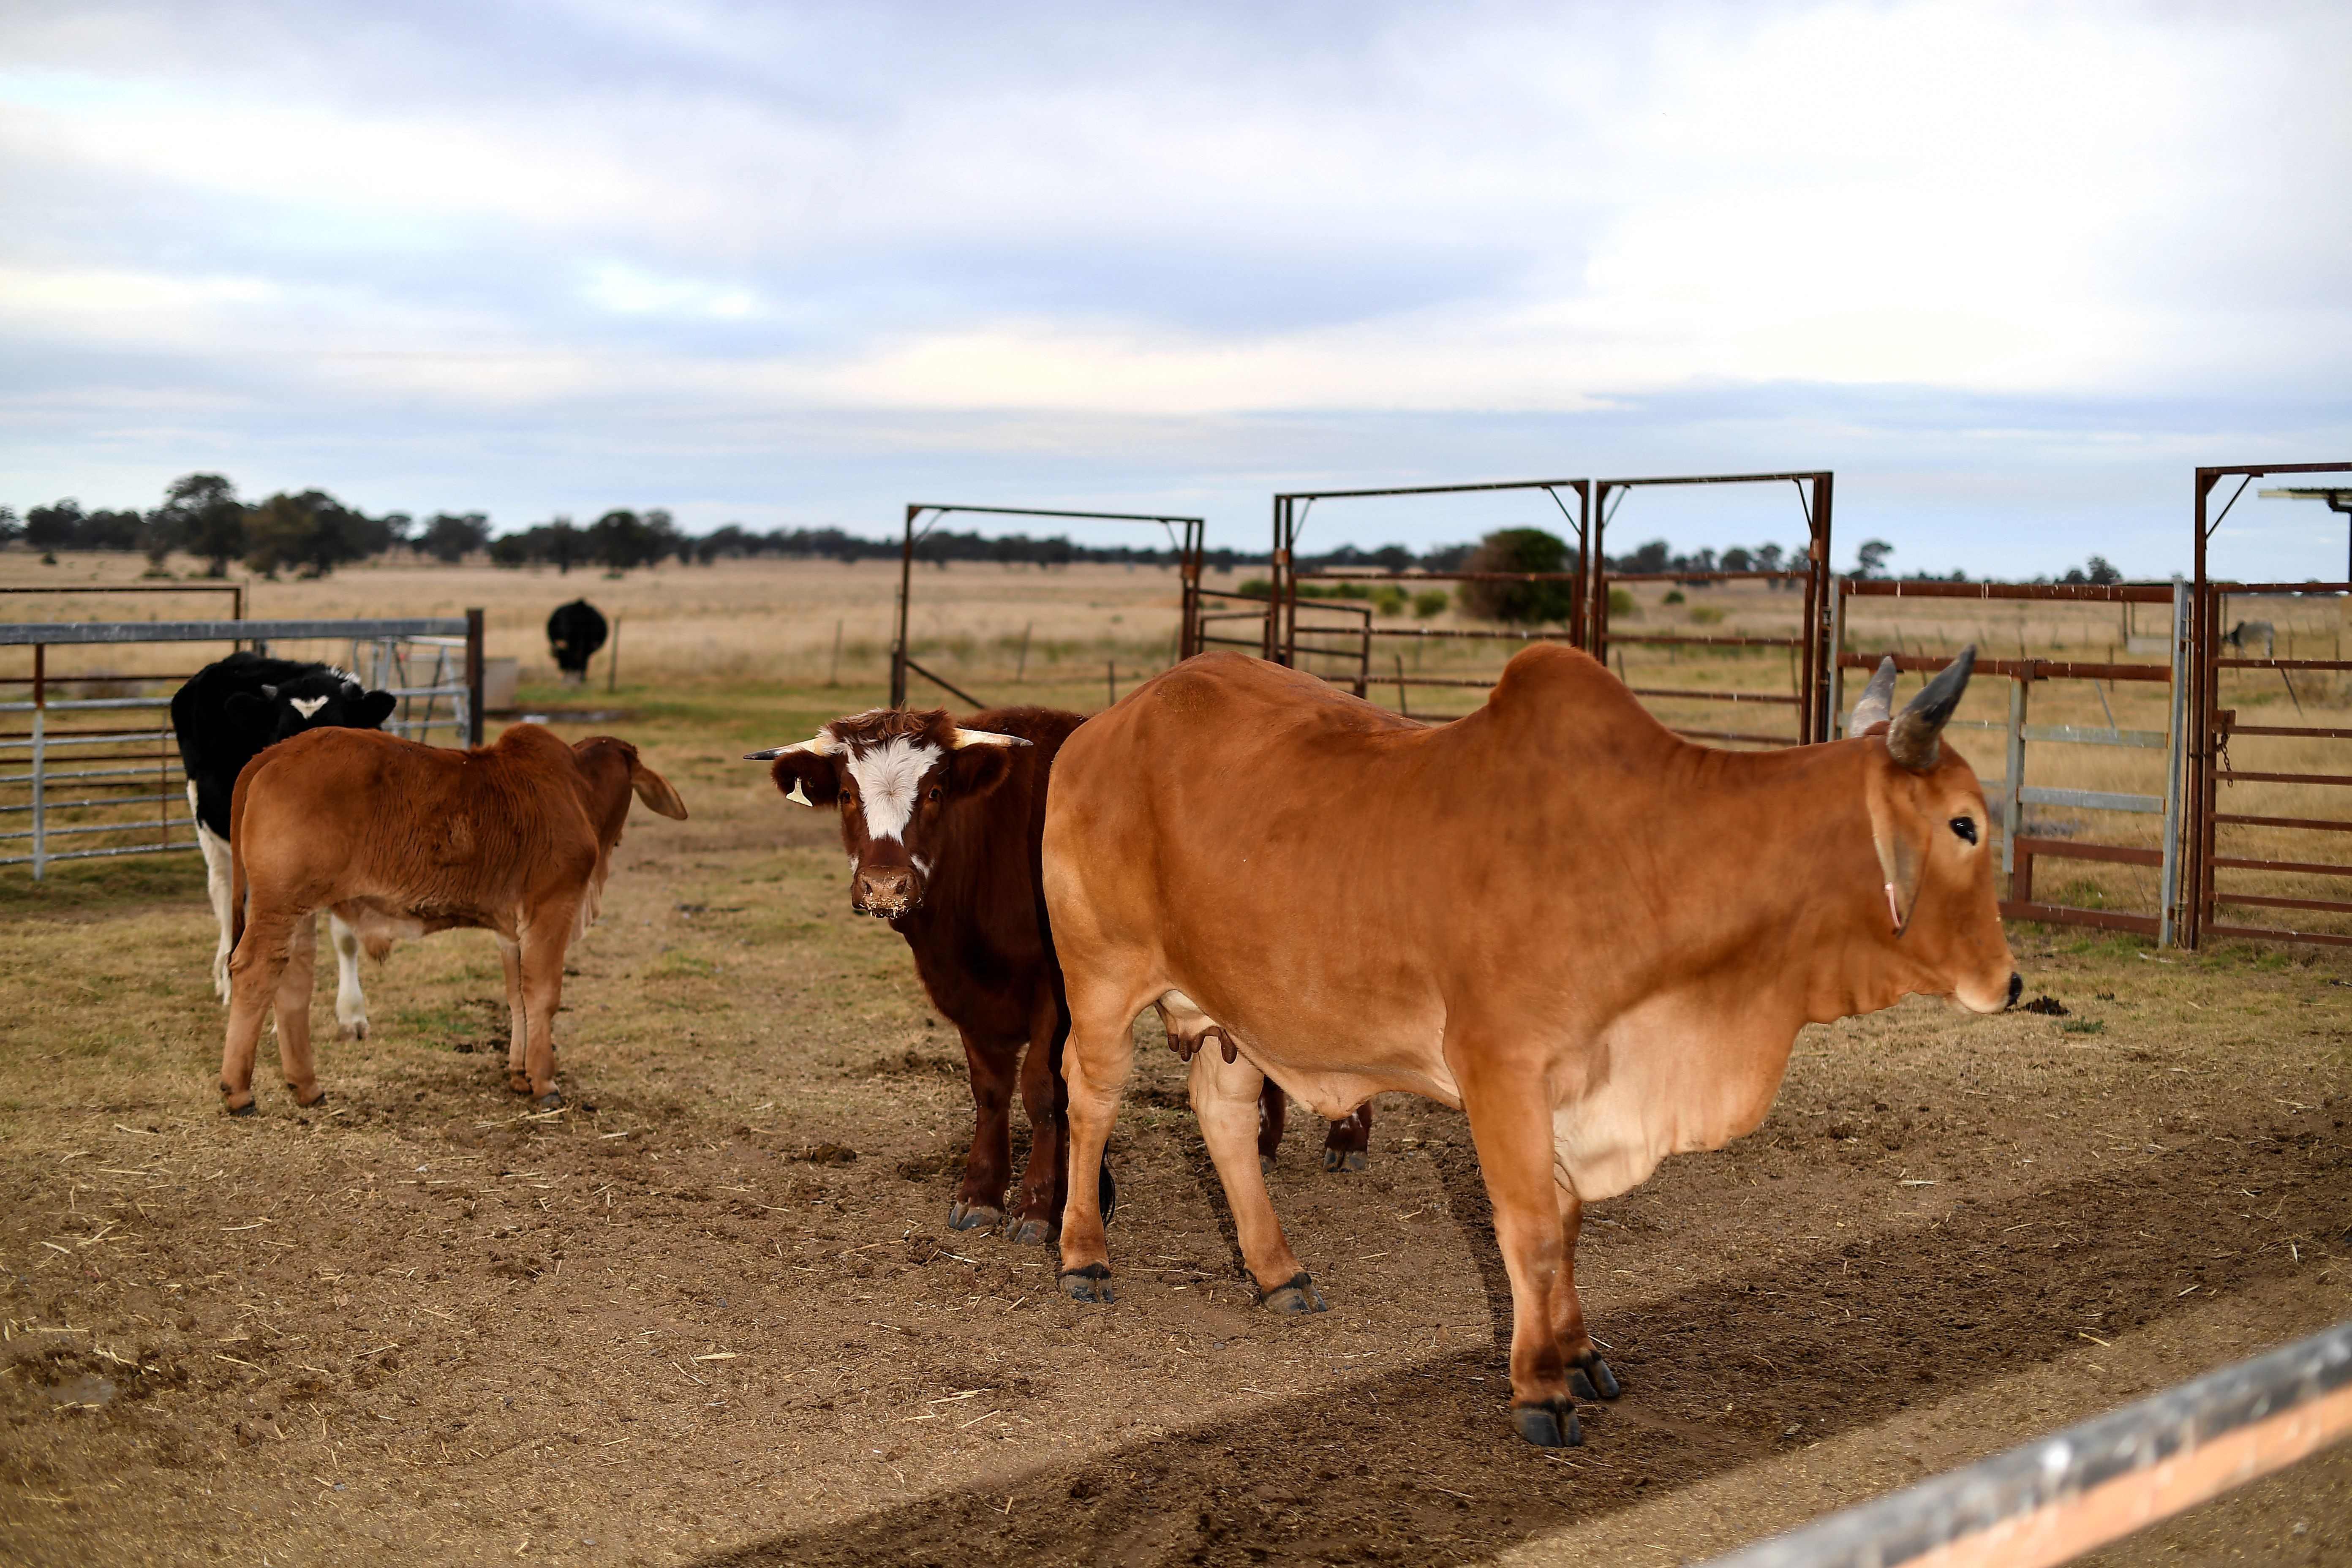 Cattle at a farm in Australia. Concerns have been raised about the use of pesticides and antibiotics